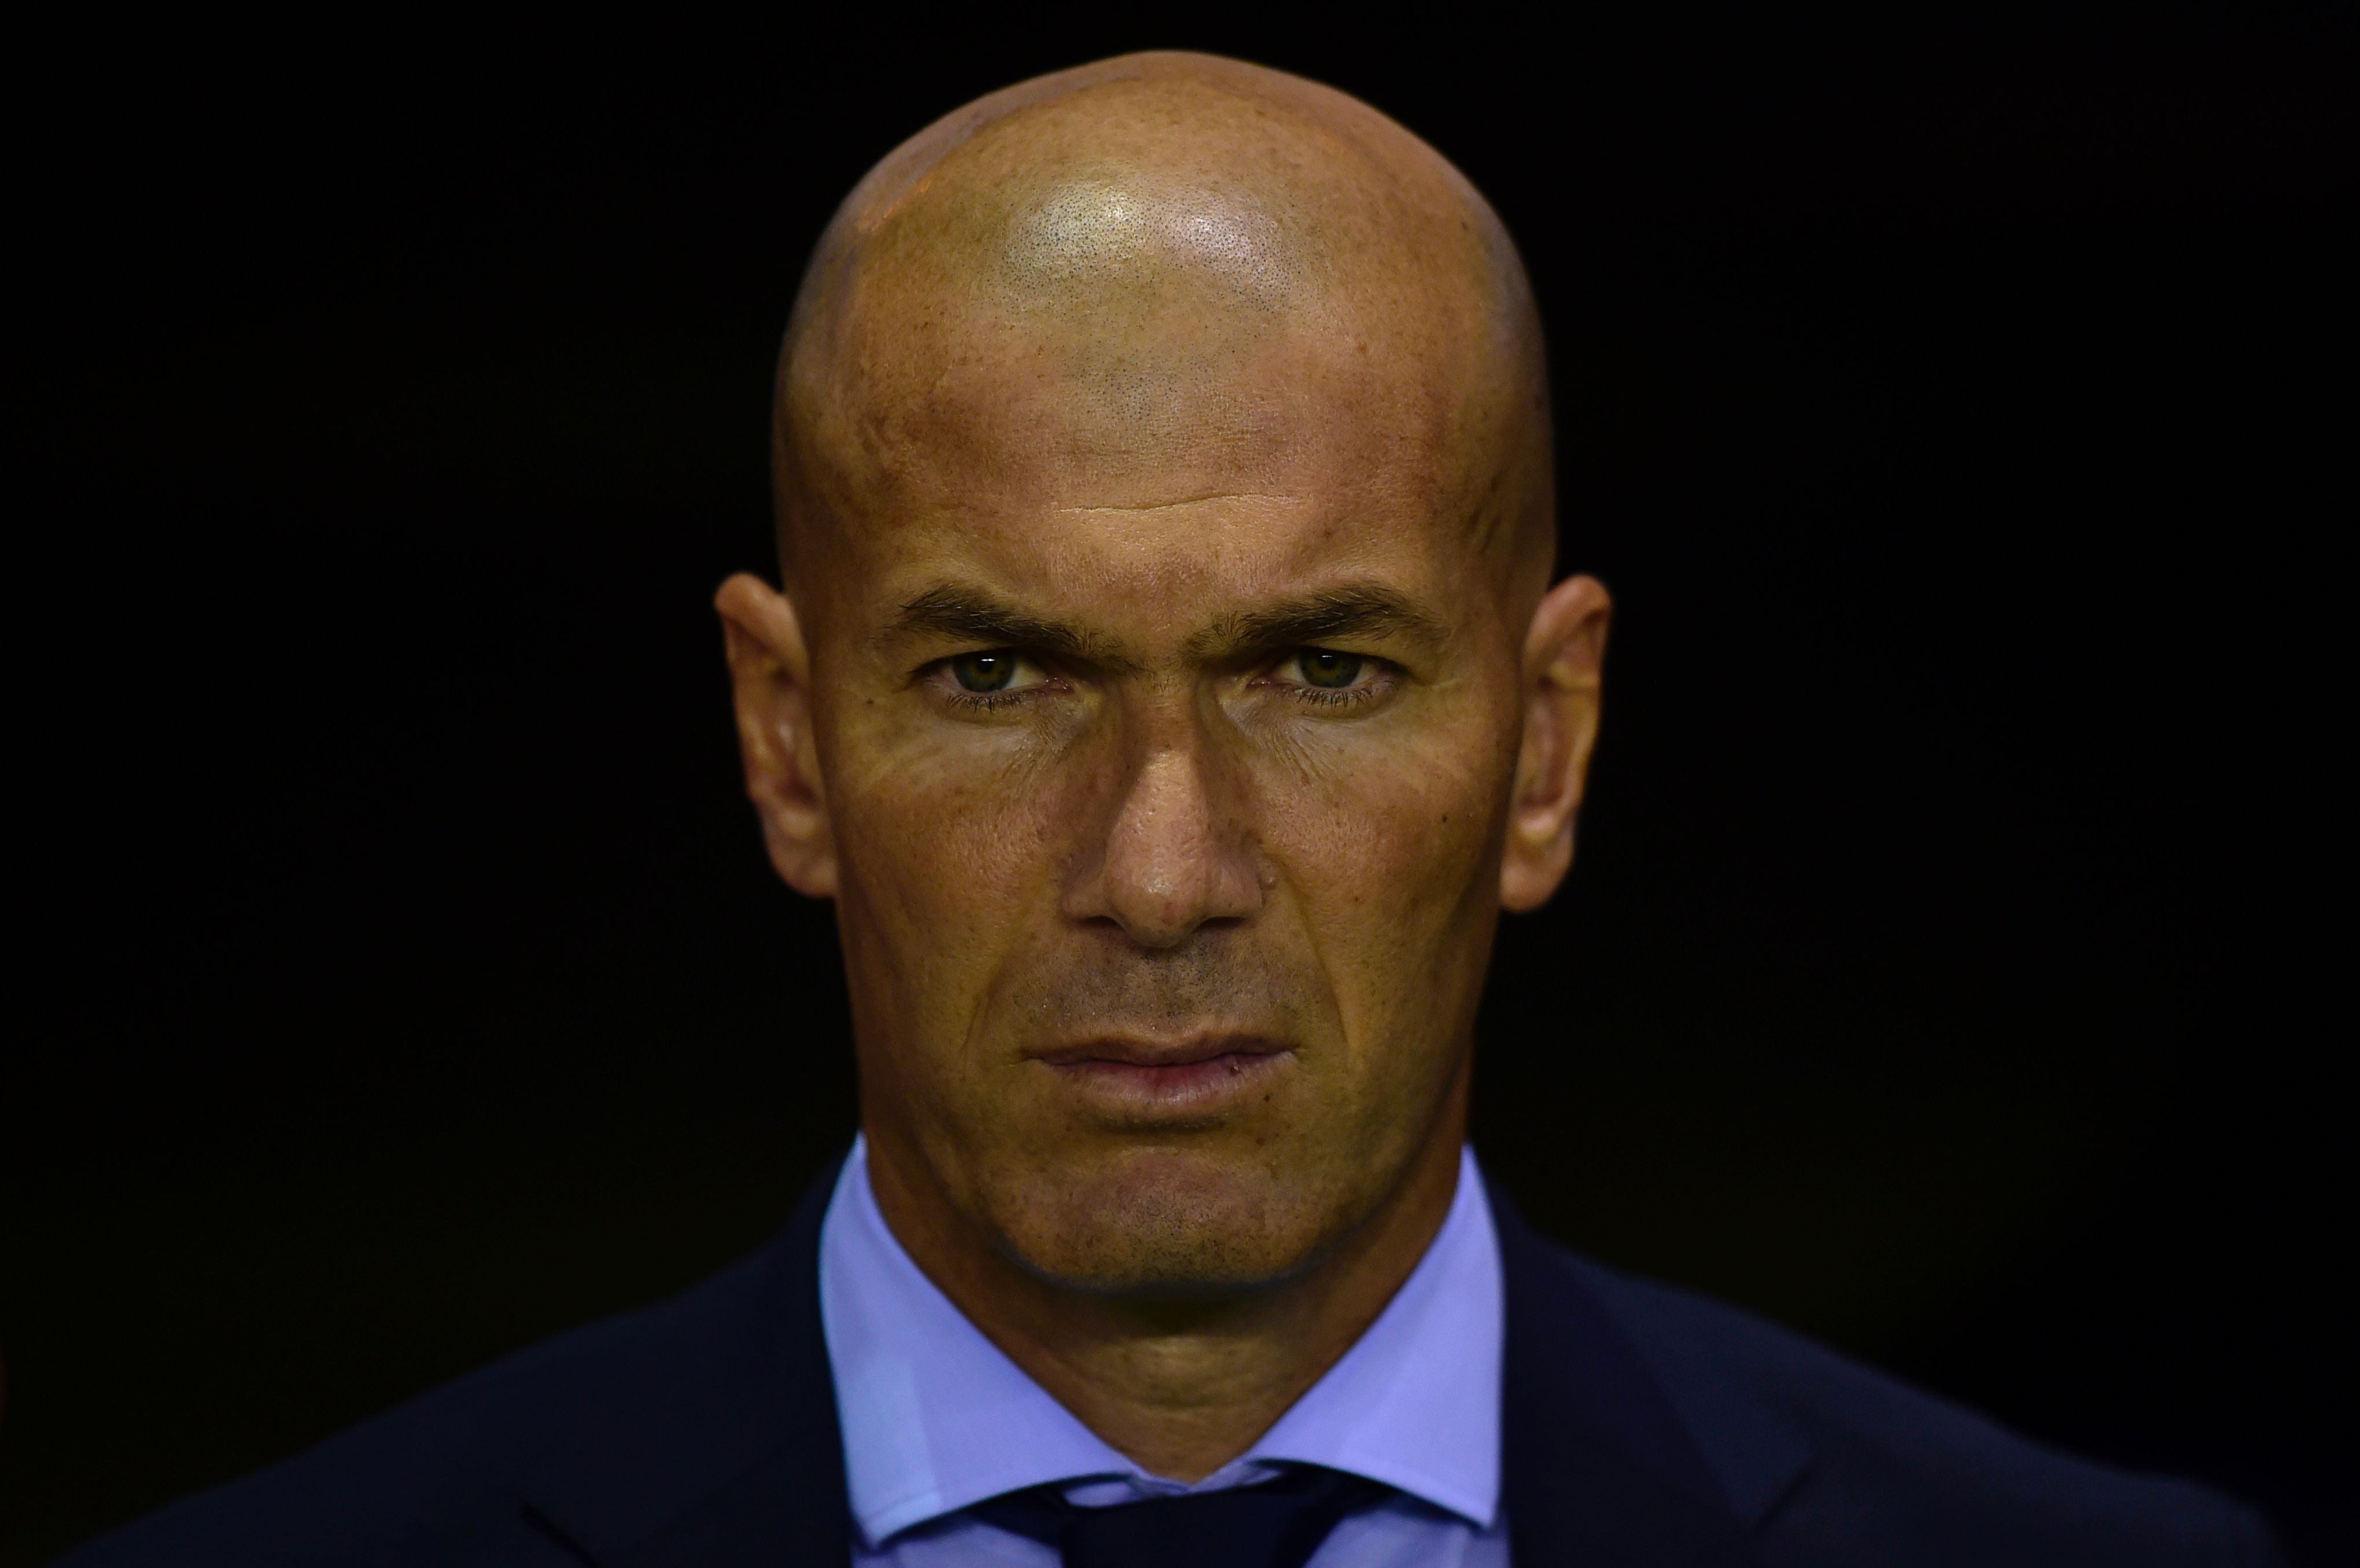 Real Madrid's French coach Zinedine Zidane observes a minute of silence in tribute to the victims of Barcelona and Cambrils attacks before the Spanish league footbal match RC Deportivo de la Coruna vs Real Madrid CF at the Municipal de Riazor stadium in La Coruna on August 20, 2017. / AFP PHOTO / MIGUEL RIOPA        (Photo credit should read MIGUEL RIOPA/AFP/Getty Images)